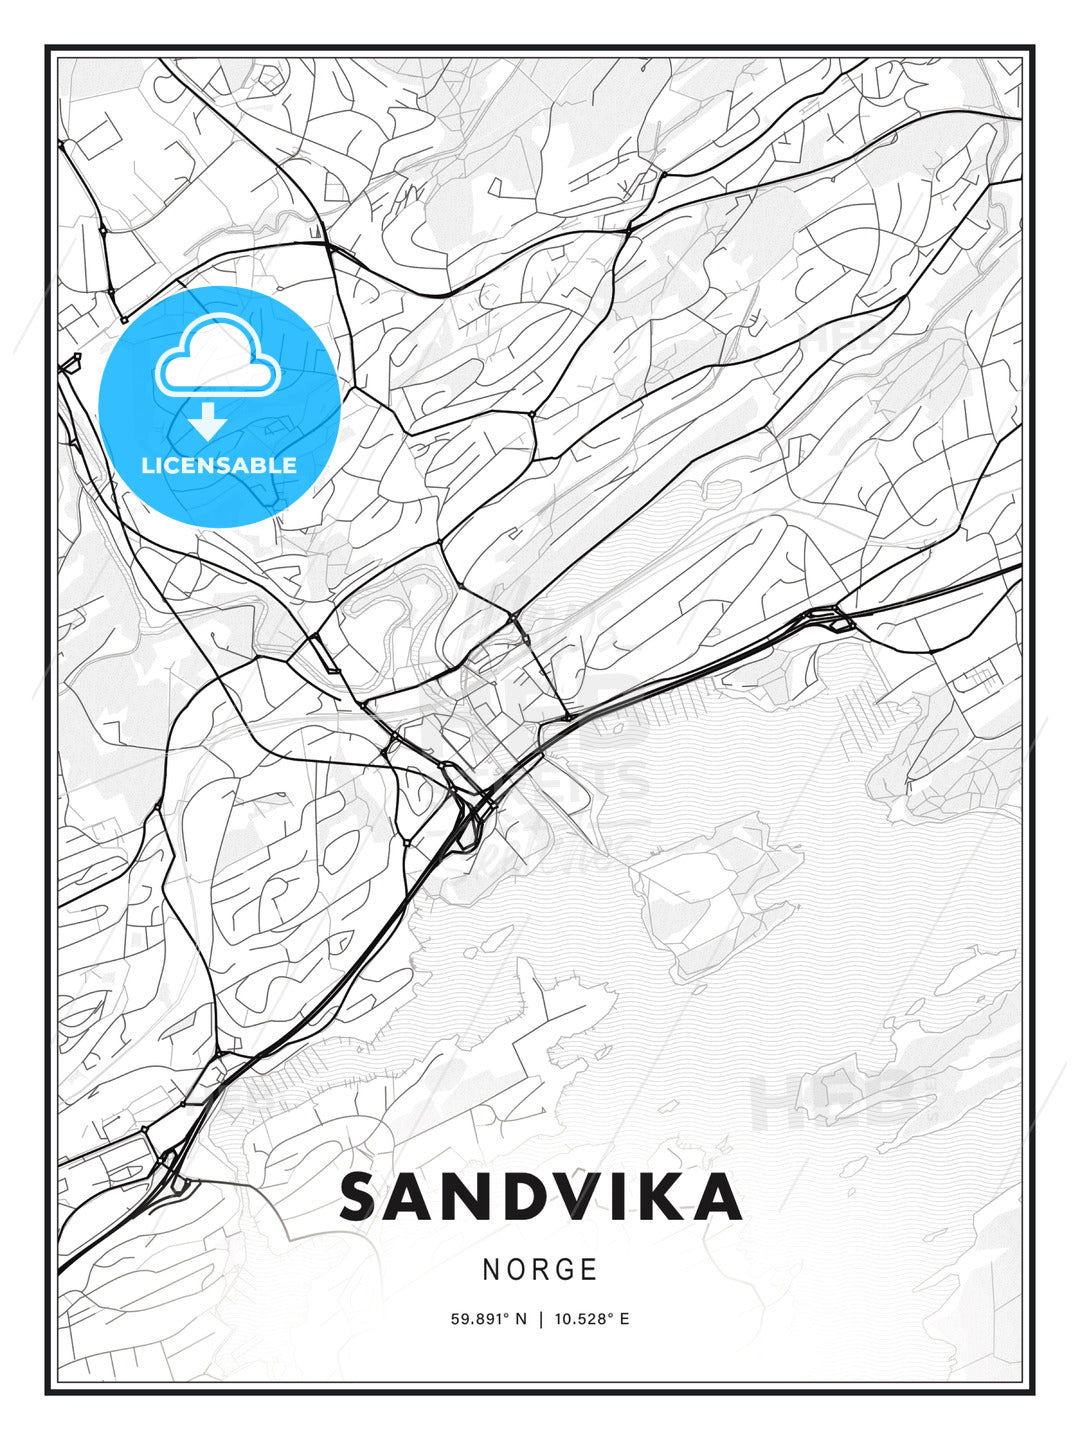 Sandvika, Norway, Modern Print Template in Various Formats - HEBSTREITS Sketches